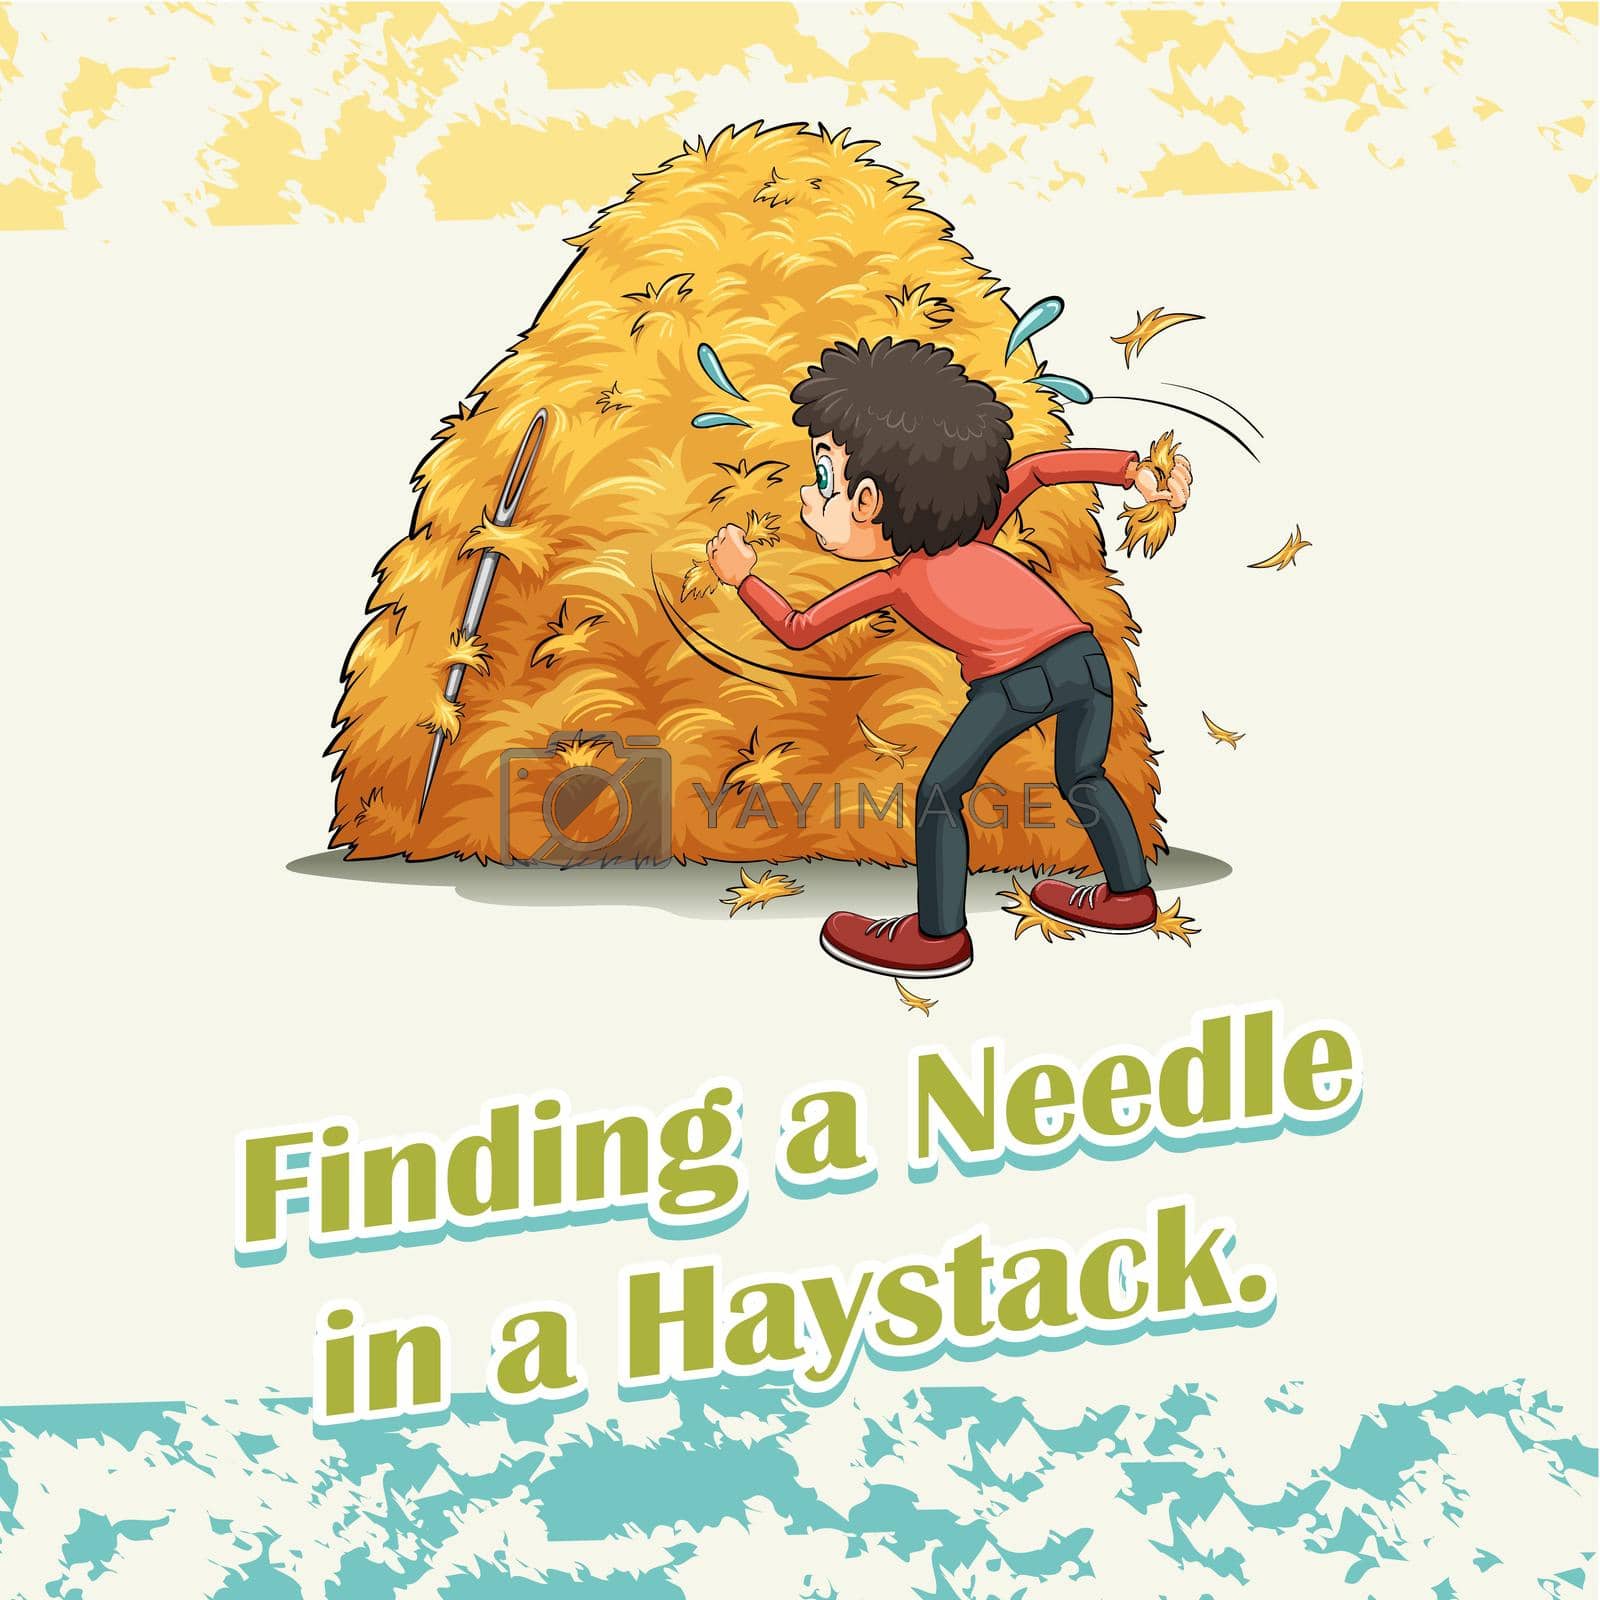 Royalty free image of Finding a needle in a haystack by iimages